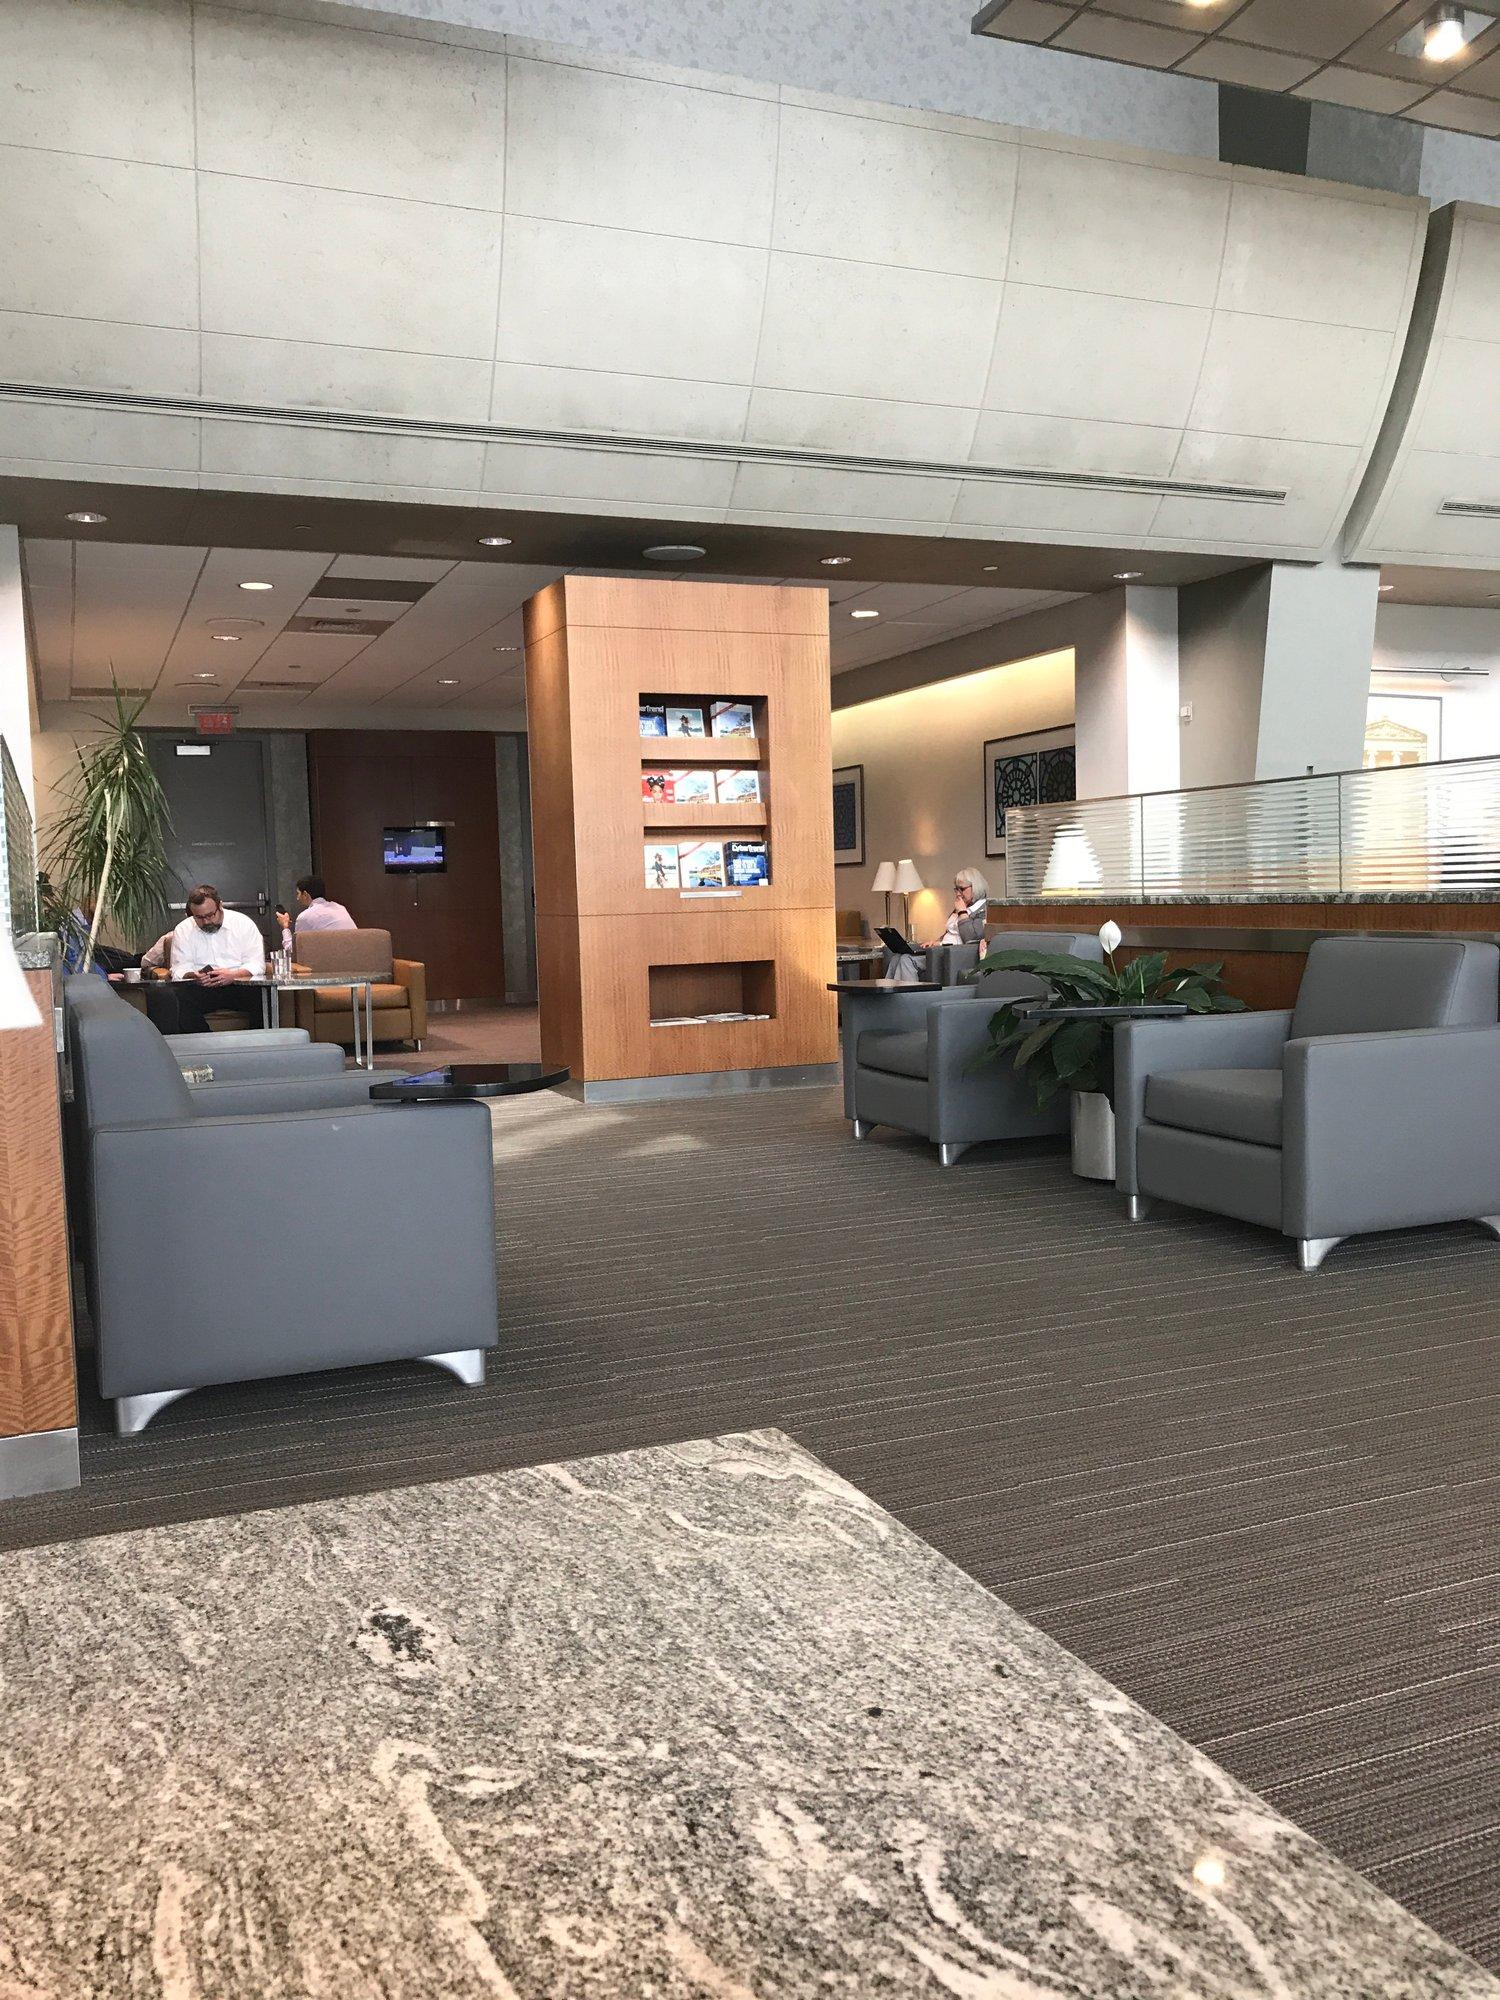 American Airlines Admirals Club image 23 of 48